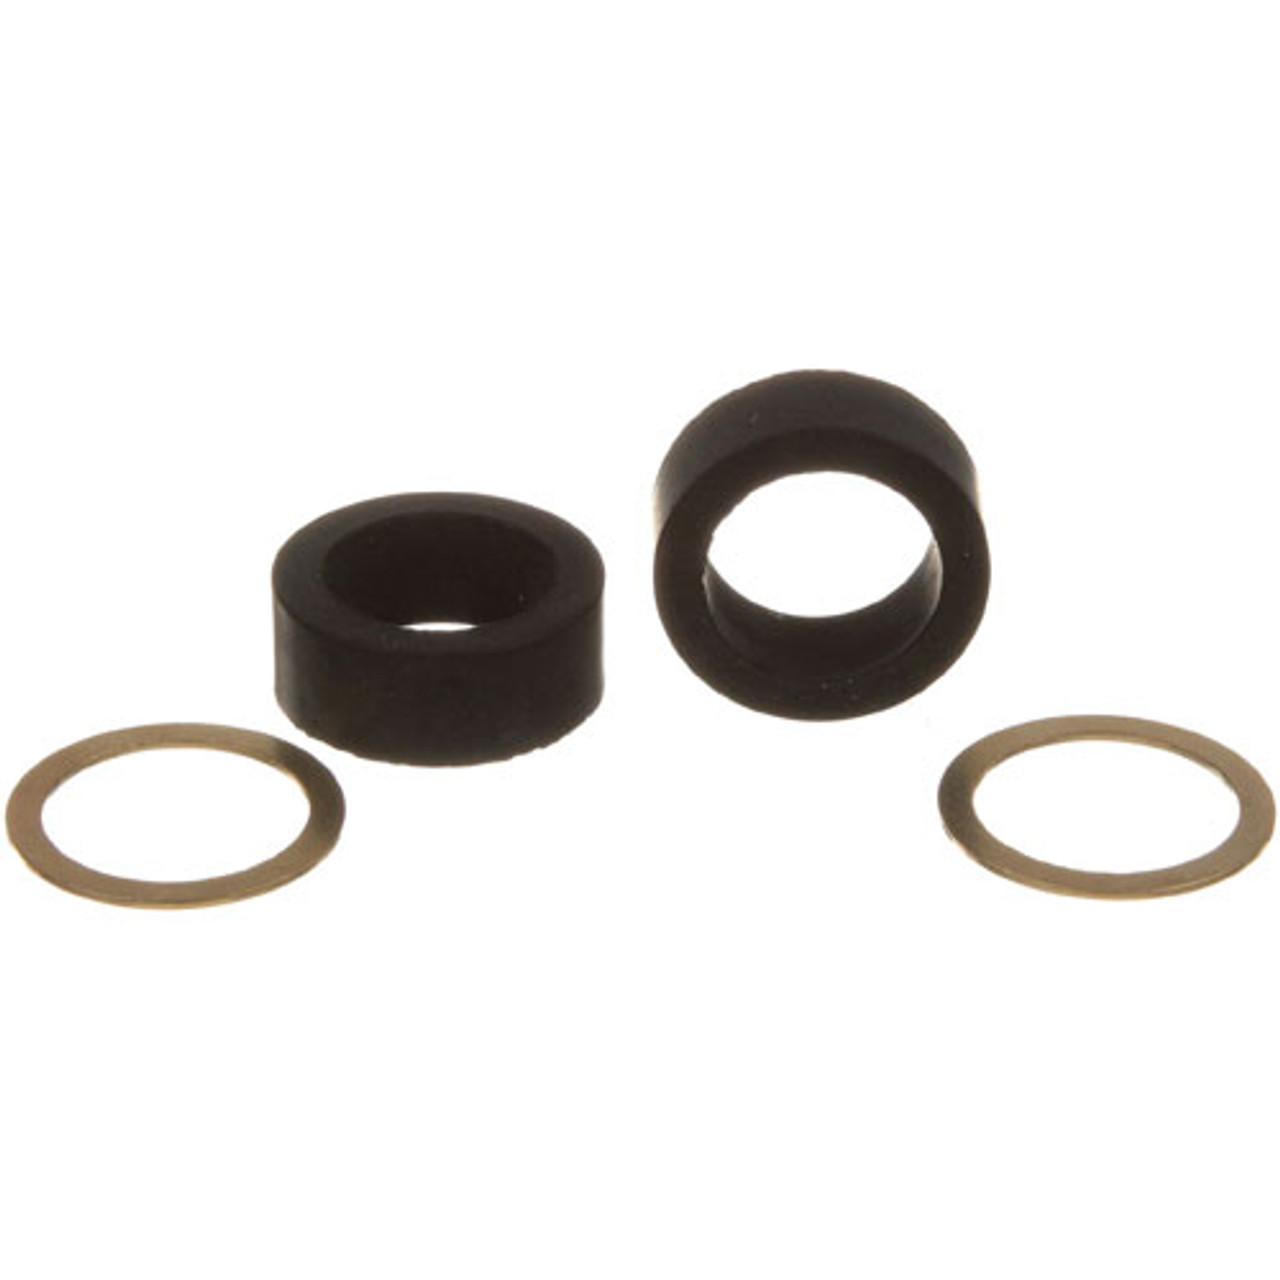 Washer Set - Replacement Part For Market Forge 90-0039